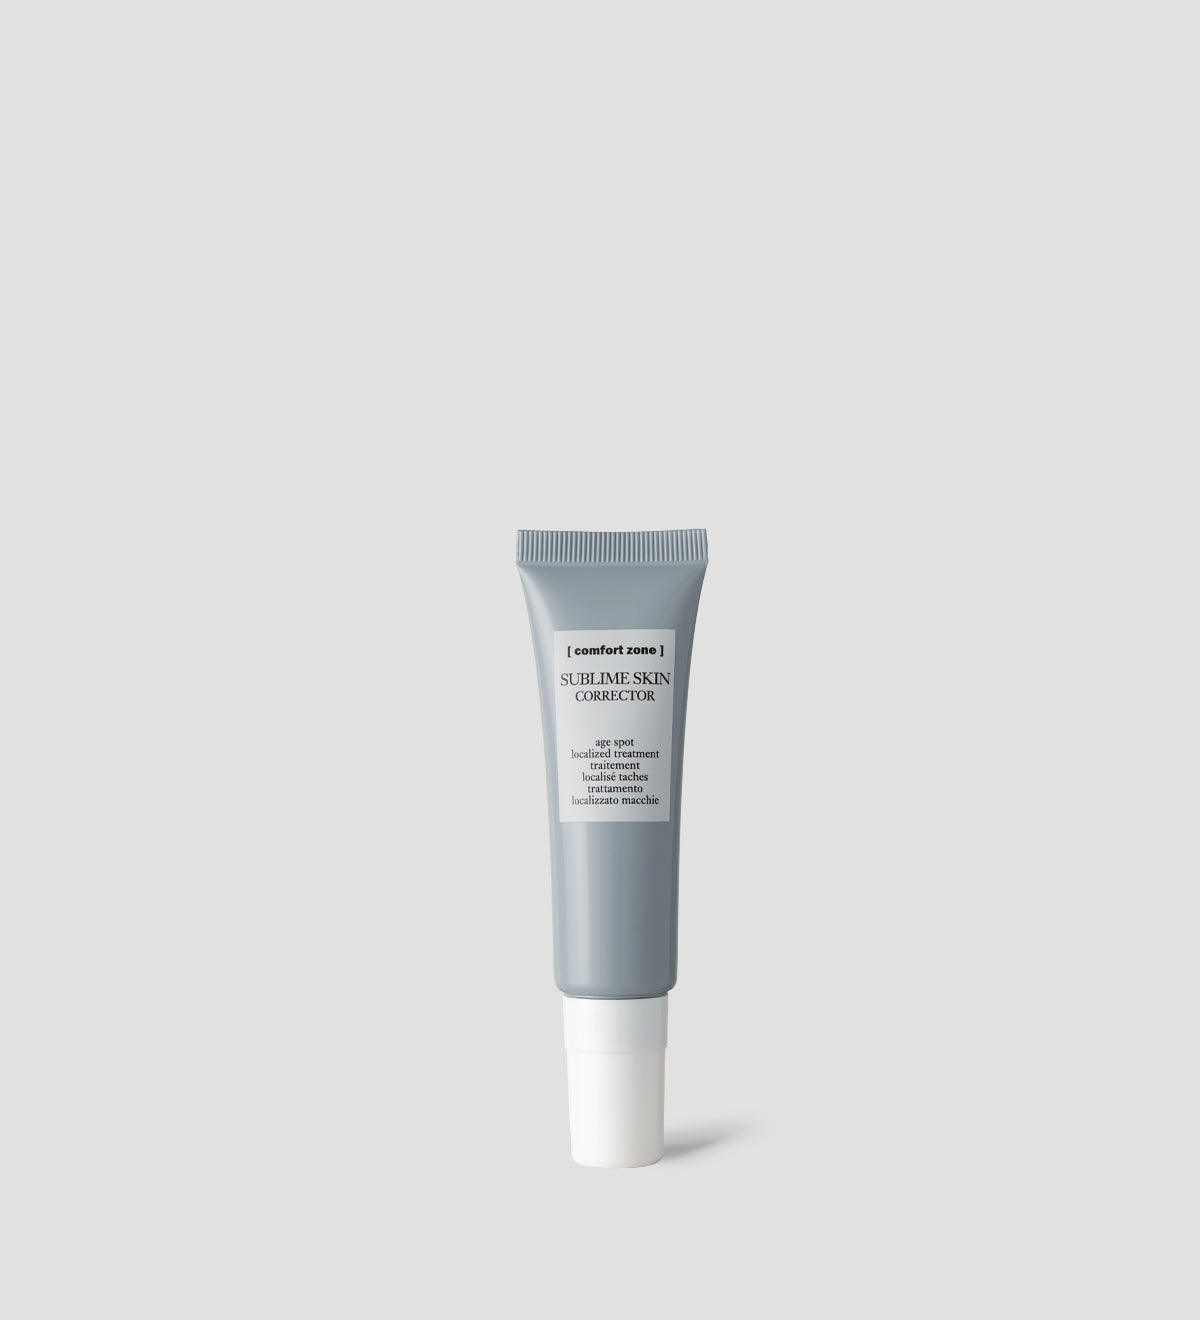 Comfort Zone: SUBLIME SKIN CORRECTOR Age spot localized treatment-
